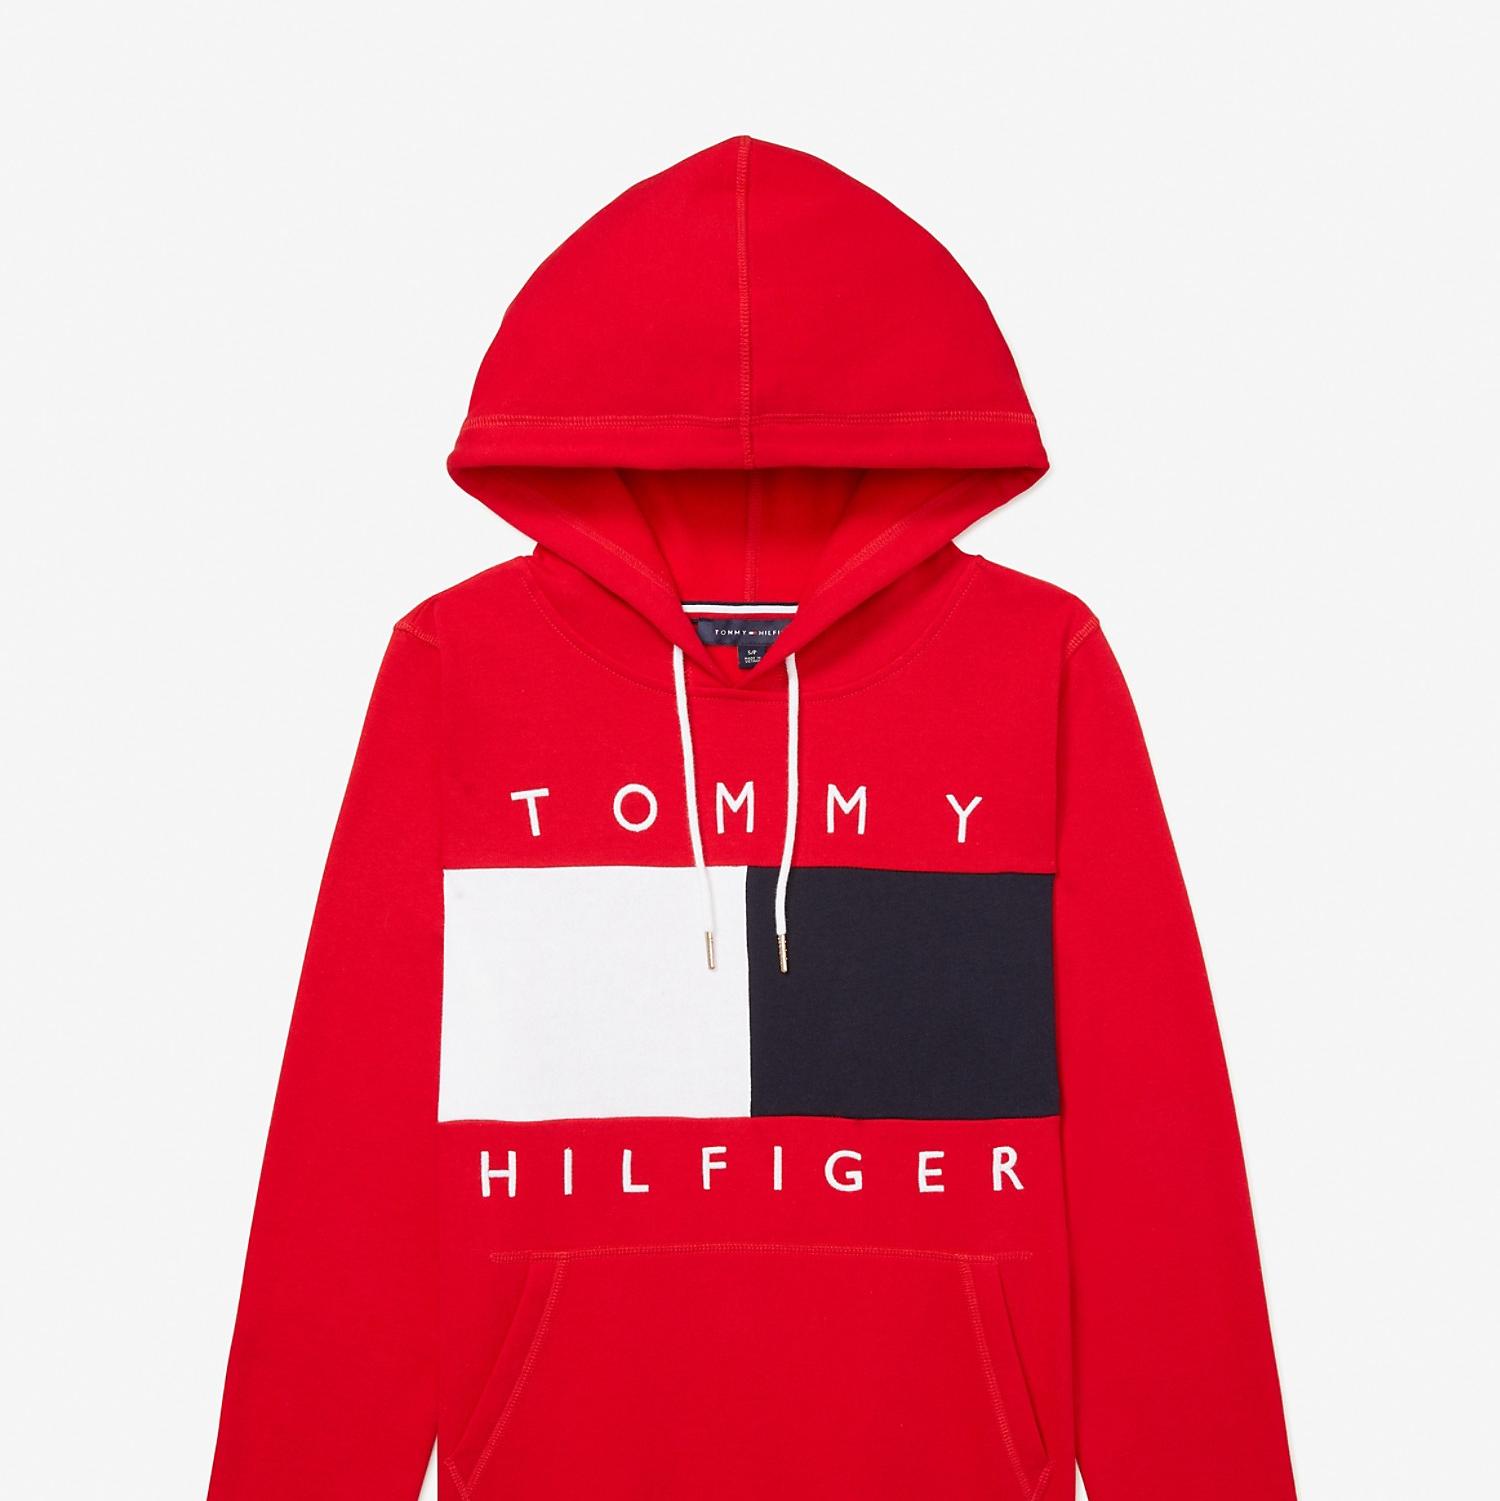 Tommy Hilfiger: 40% OFF $100+, Extra 20% OFF Sale